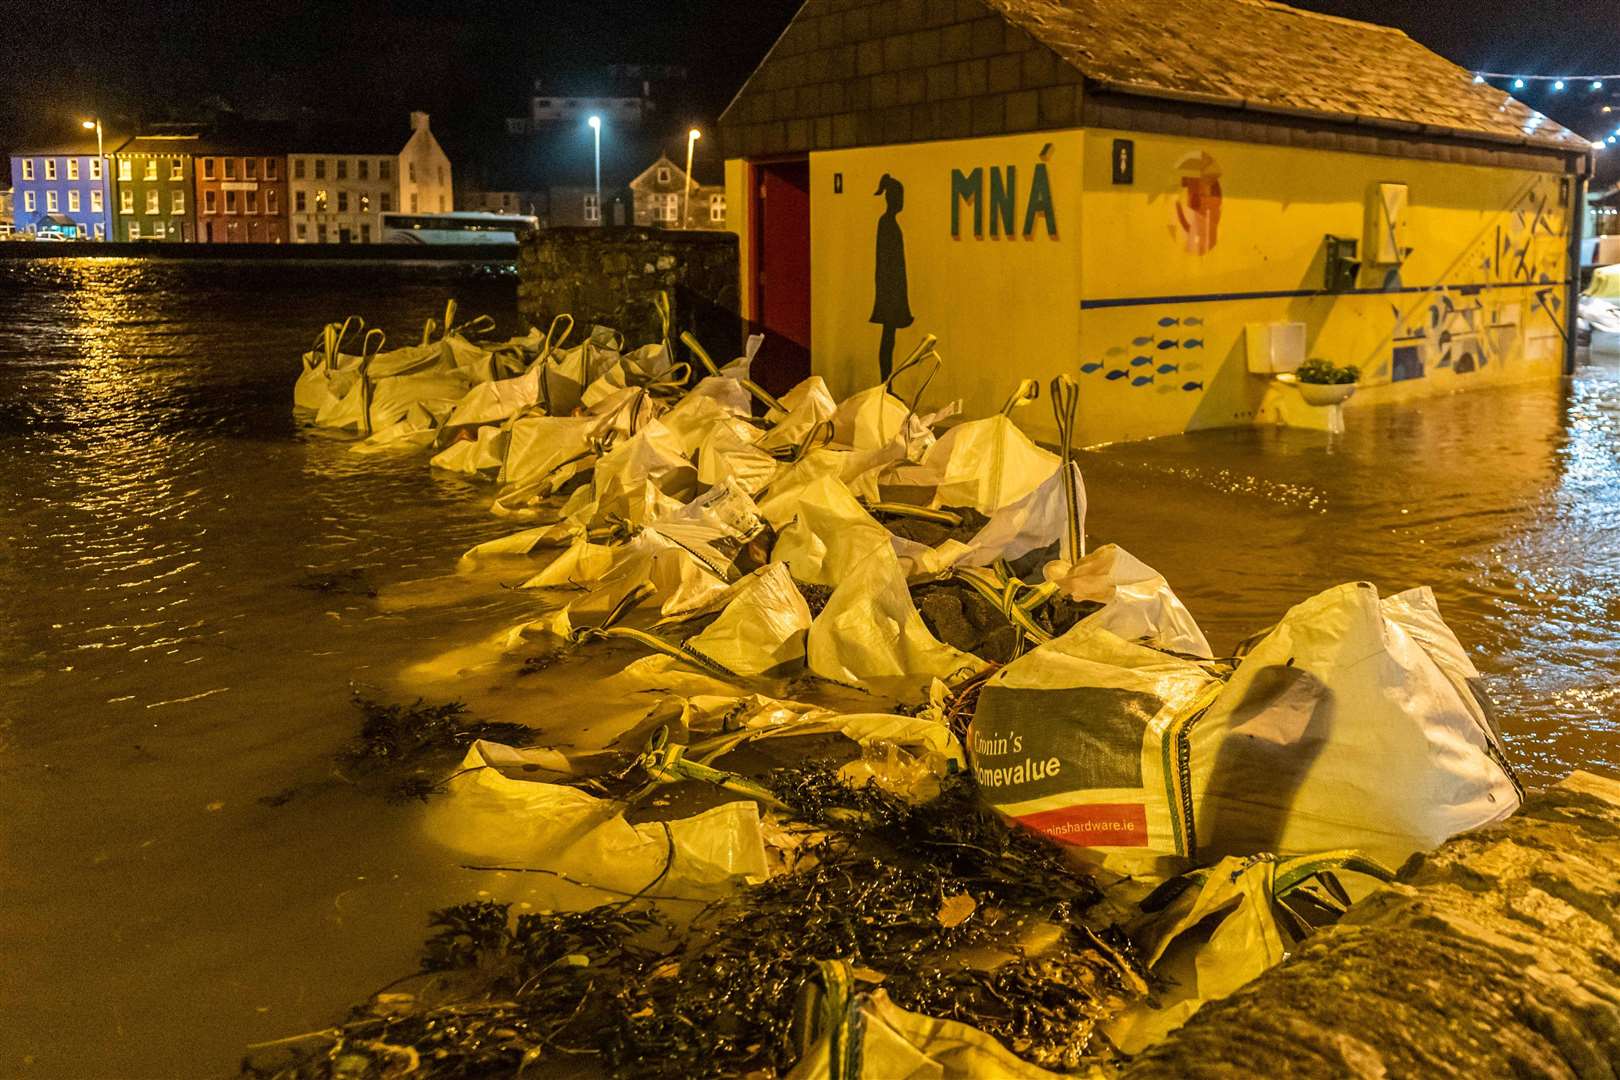 Sandbags are piled up in the town of Bantry, County Cork, which suffered flooding after Storm Barra (Andy Gibson / PA)